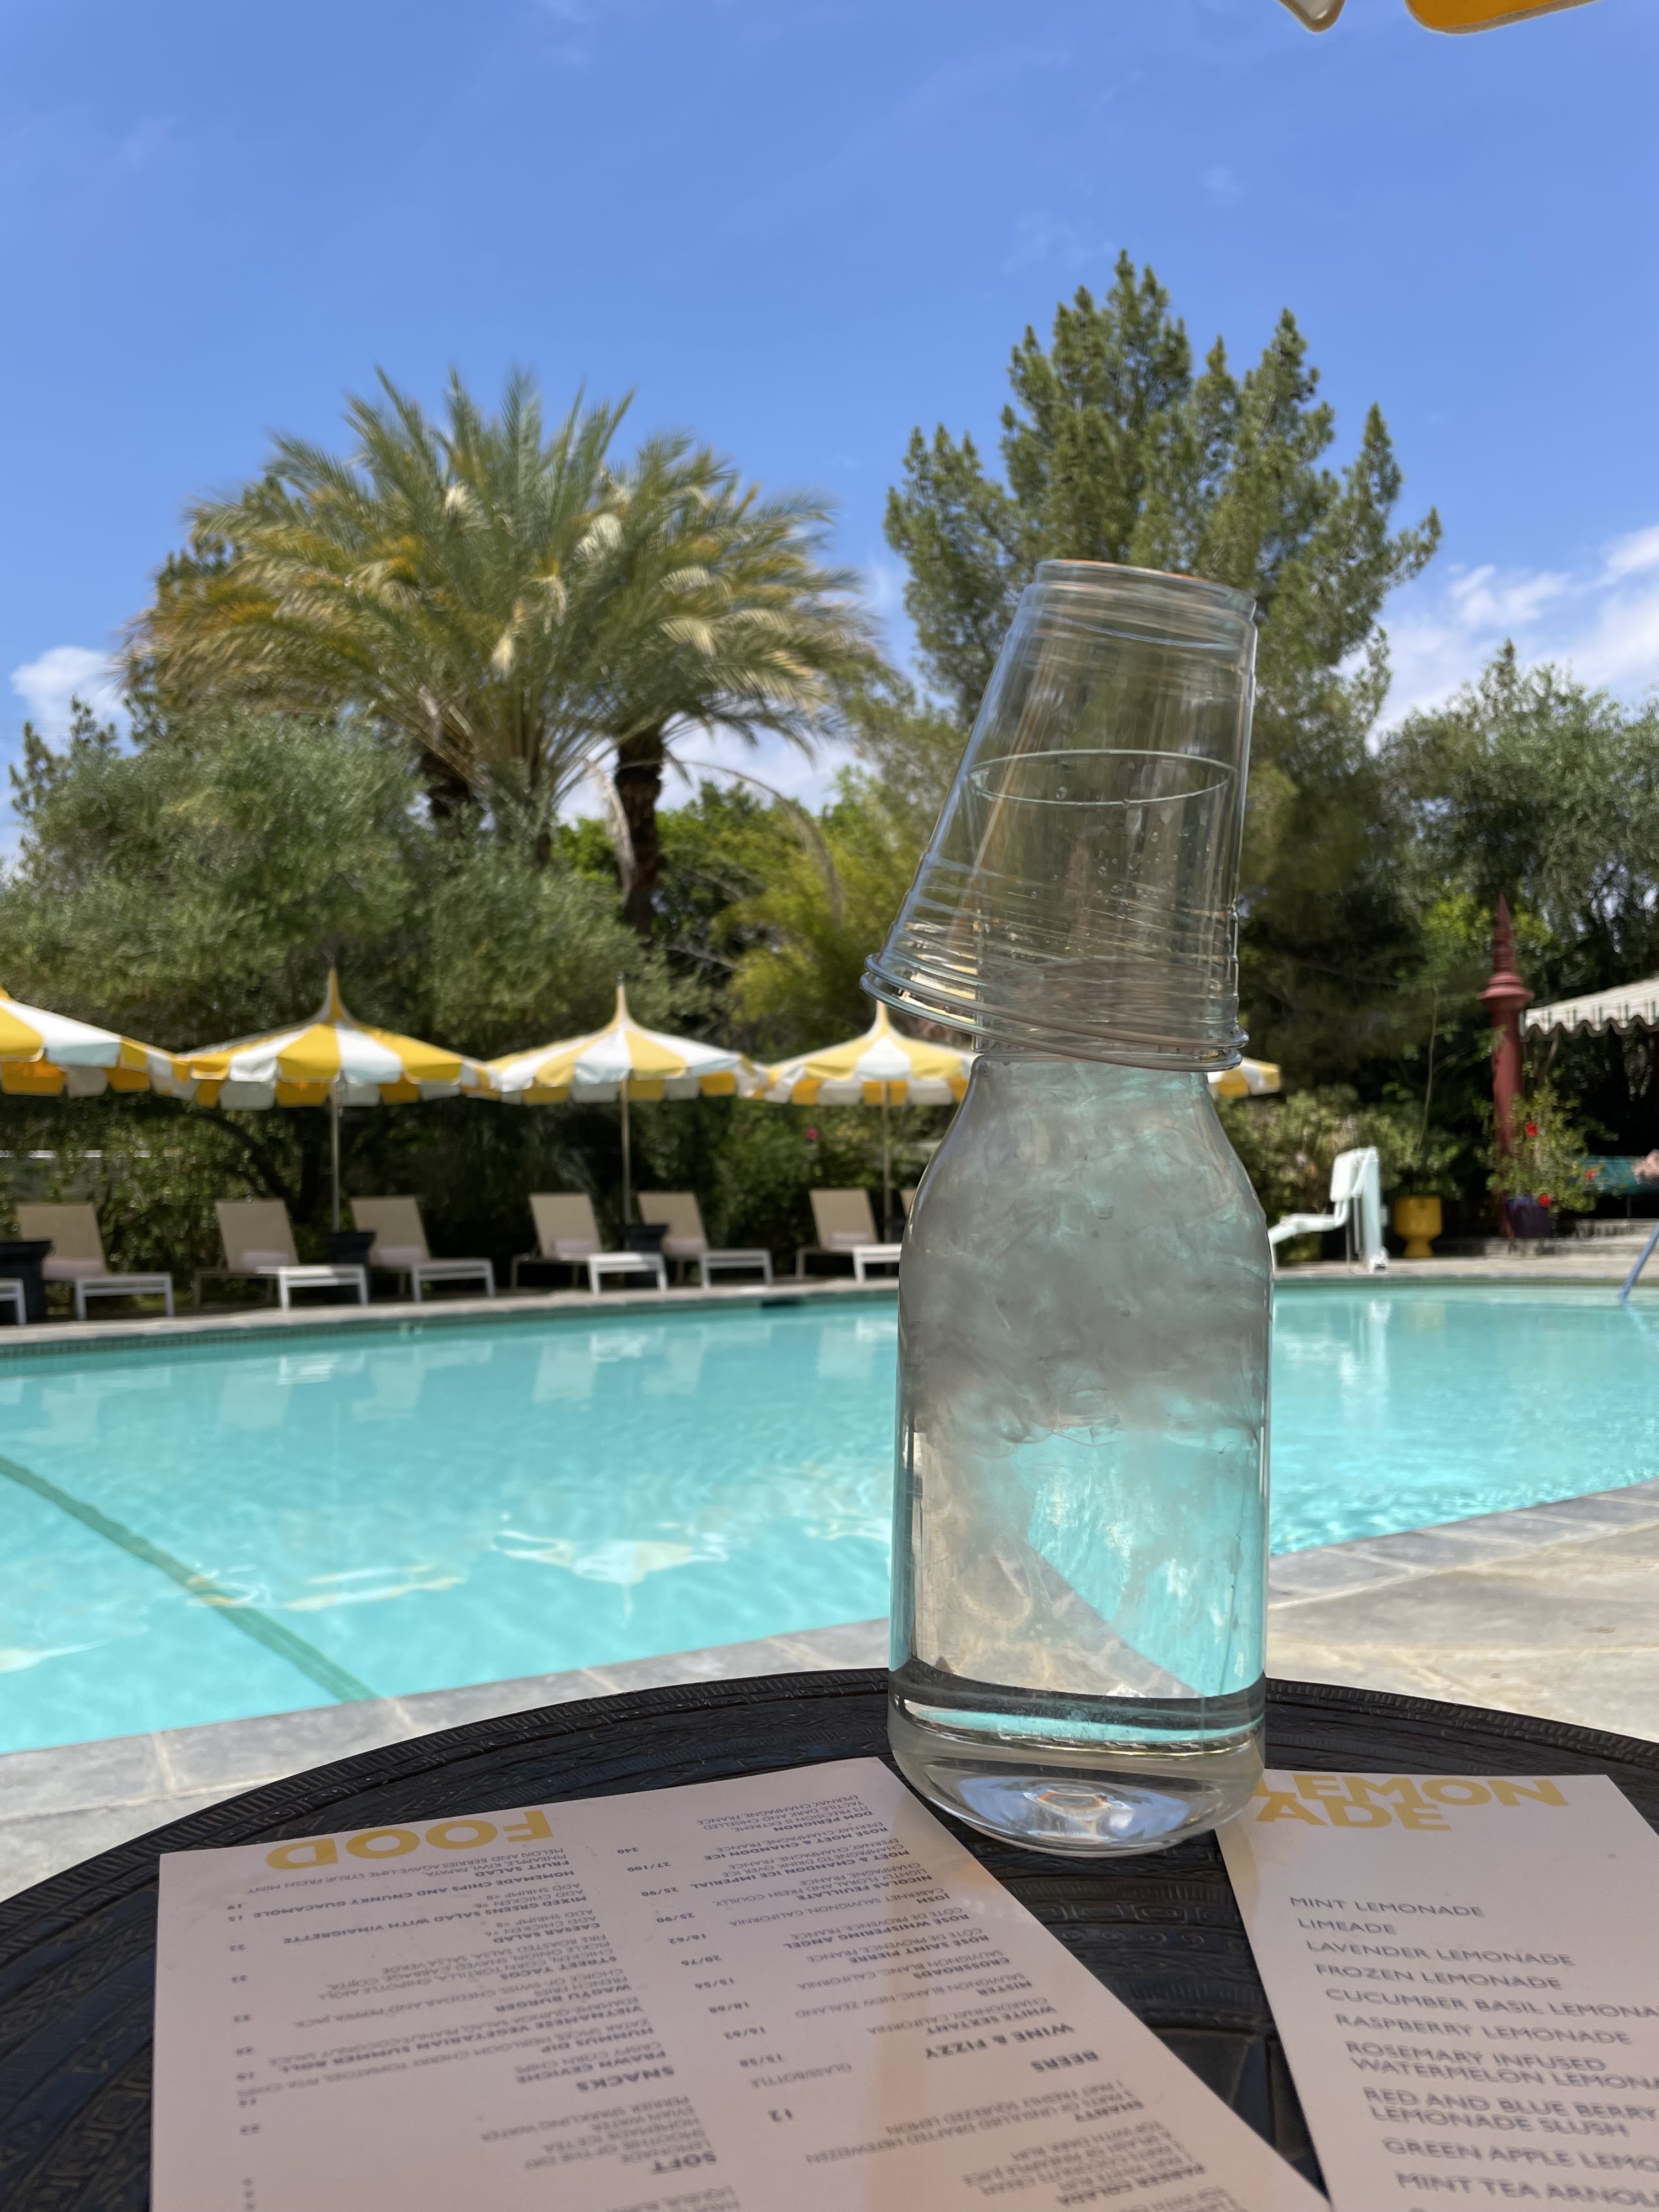 Ice water provided by the Parker by the pool